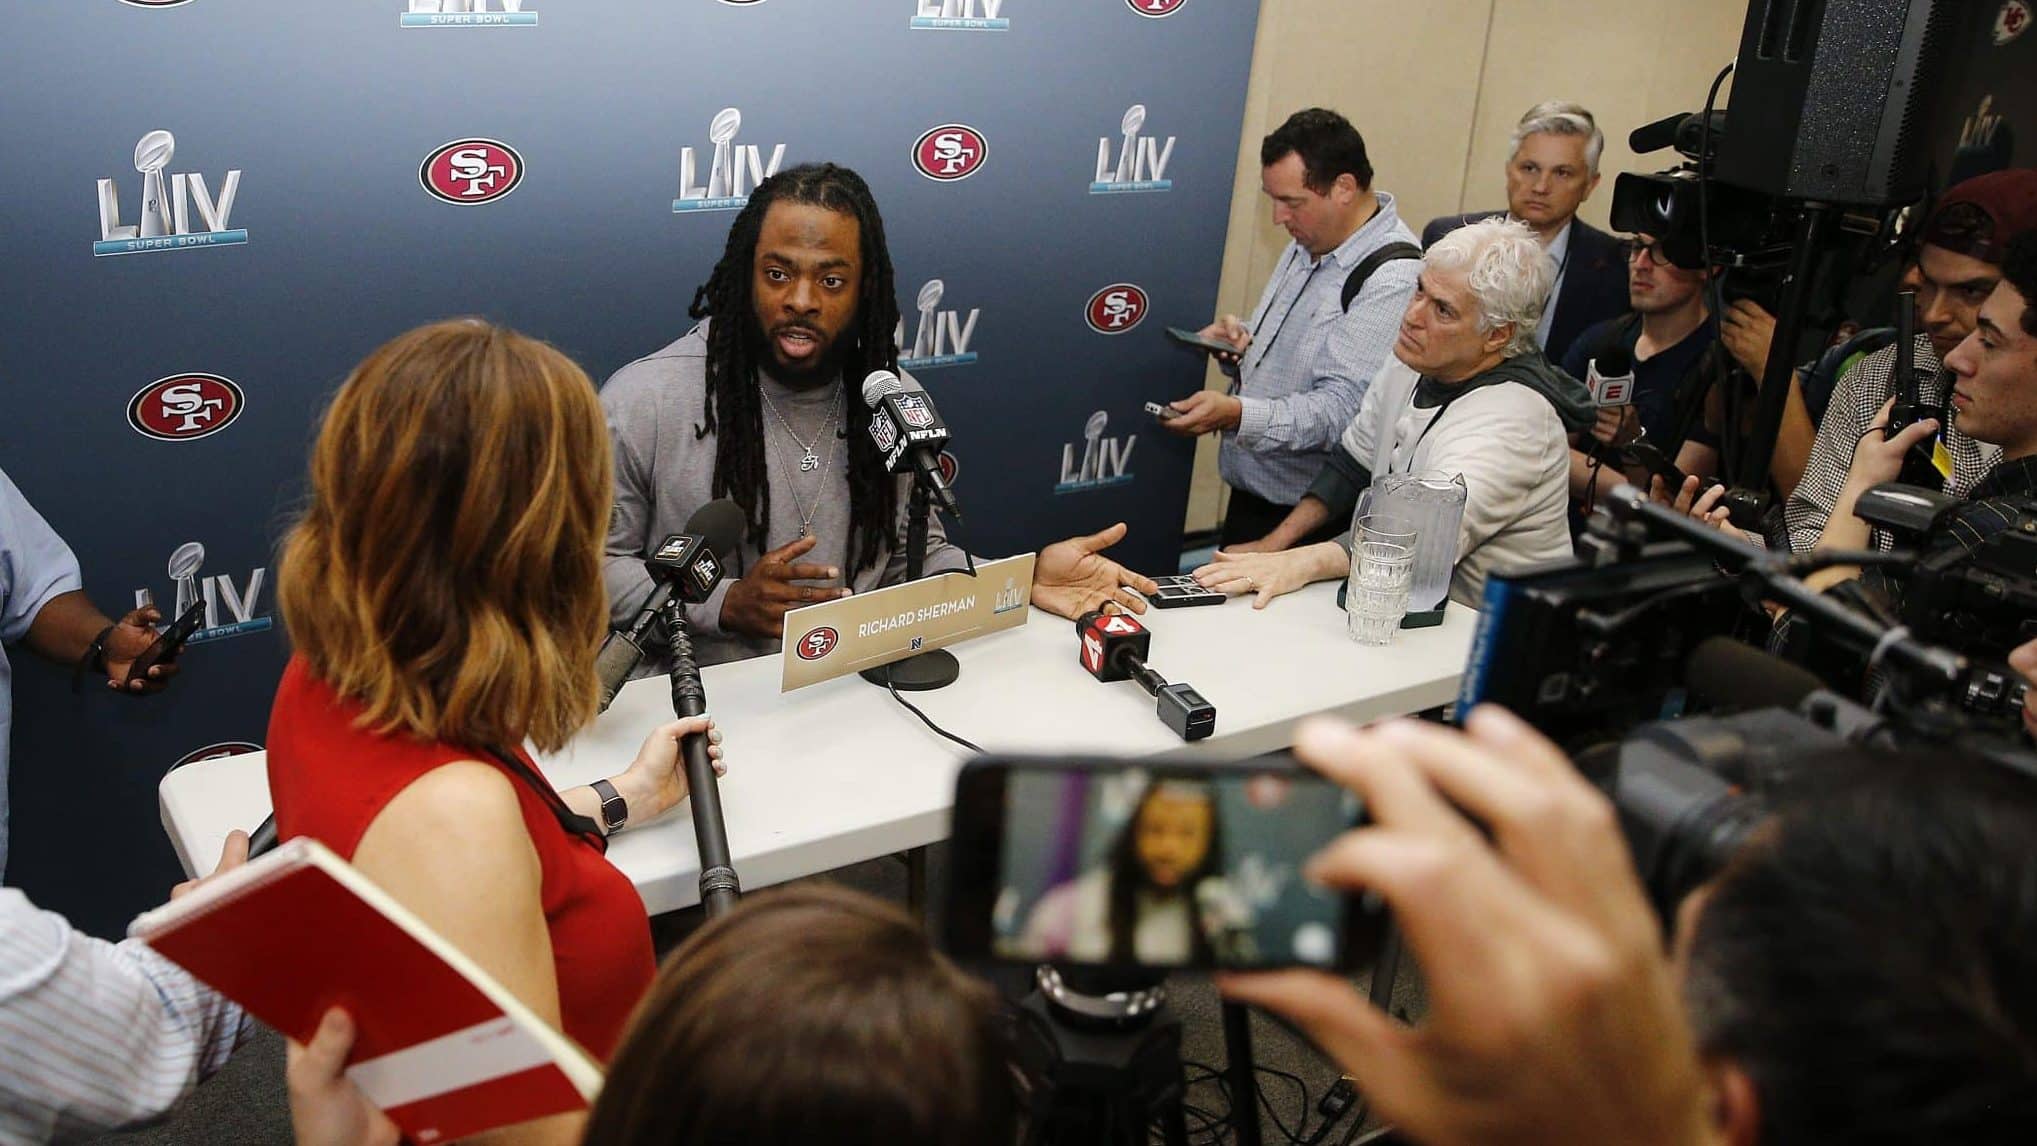 MIAMI, FLORIDA - JANUARY 28: Richard Sherman #25 of the San Francisco 49ers speaks to the media during the San Francisco 49ers media availability prior to Super Bowl LIV at the James L. Knight Center on January 28, 2020 in Miami, Florida.